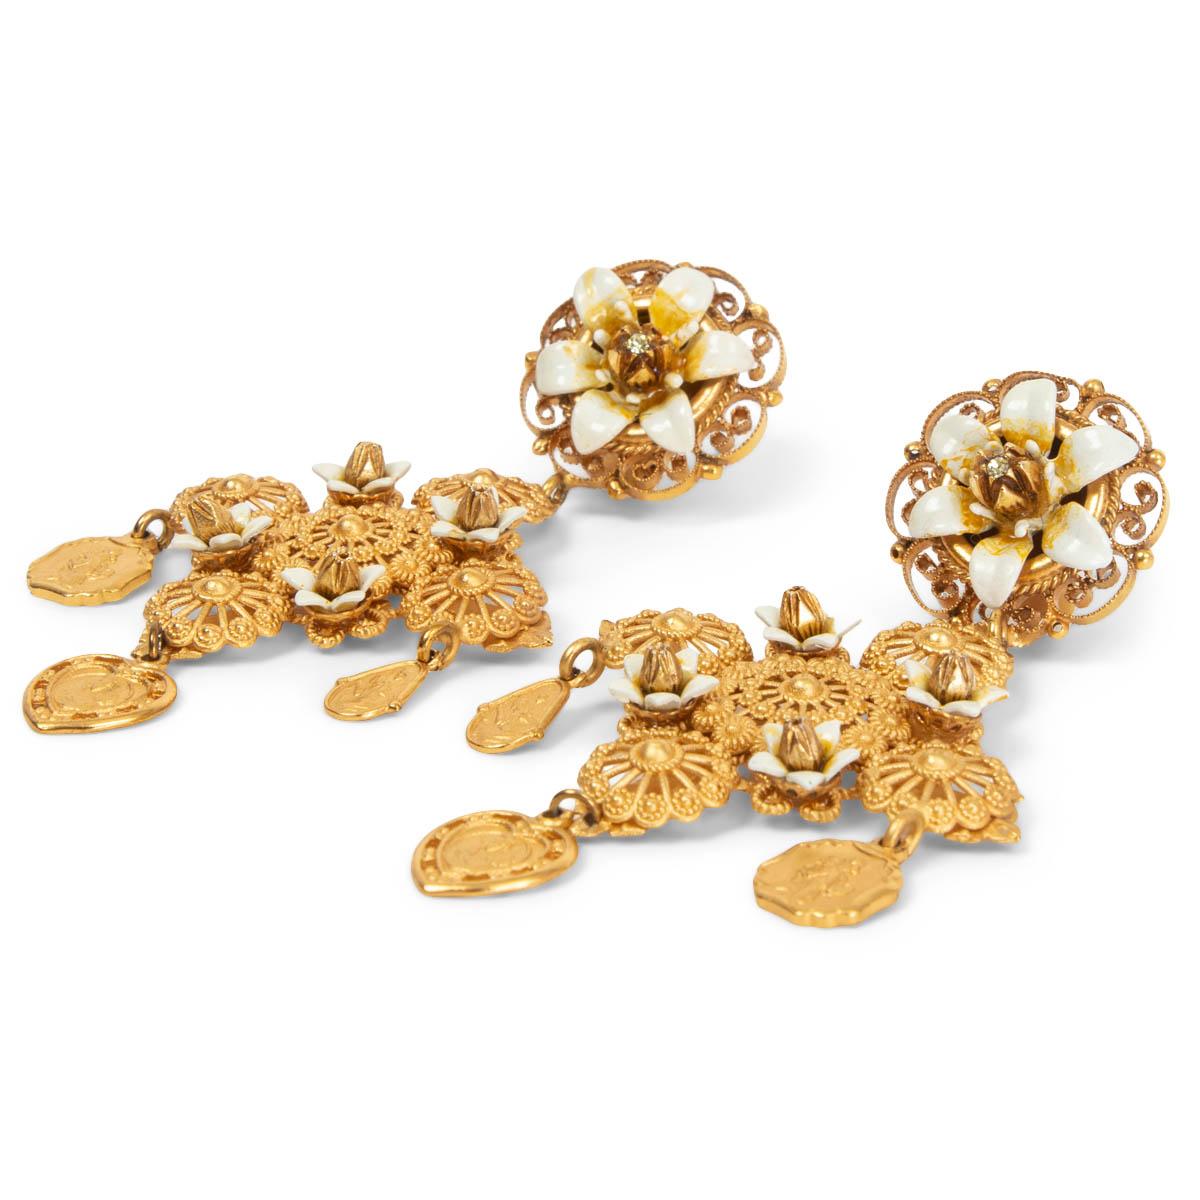 100% authentic Dolce & Gabbana Sicily Cross Madonna & Flower drop clip-on earrings with gold-tone brass filigree and white resin flowers. Have been worn and are in excellent condition. 

Measurements
Width	4.8cm (1.9in)
Length	8.8cm